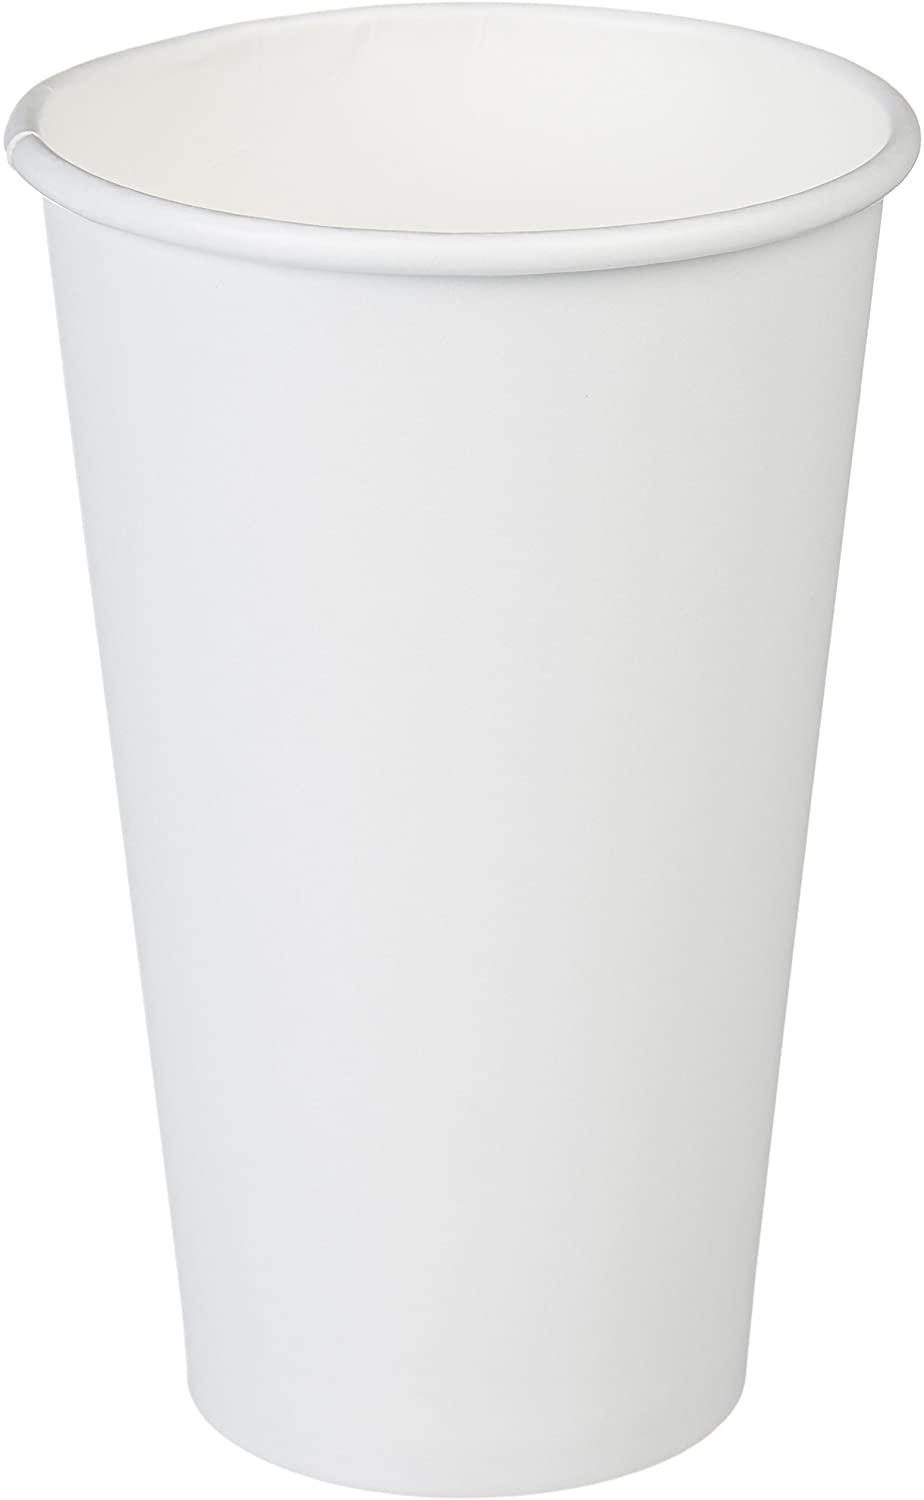 Amazon Basics 16-Ounce Paper Coffee Cups, 500-Count